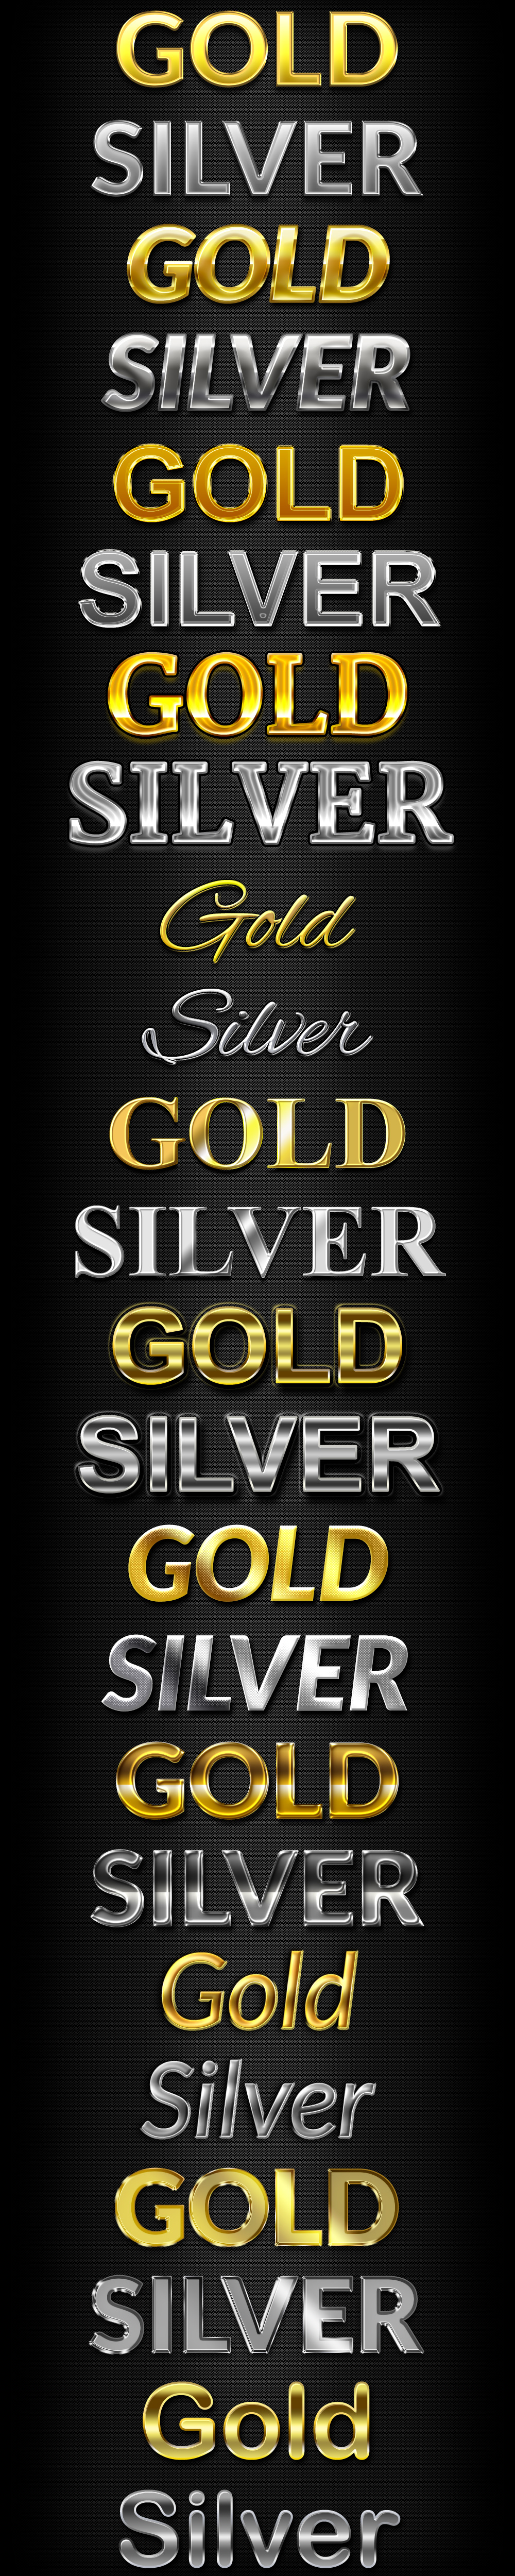 Gold silver text styles